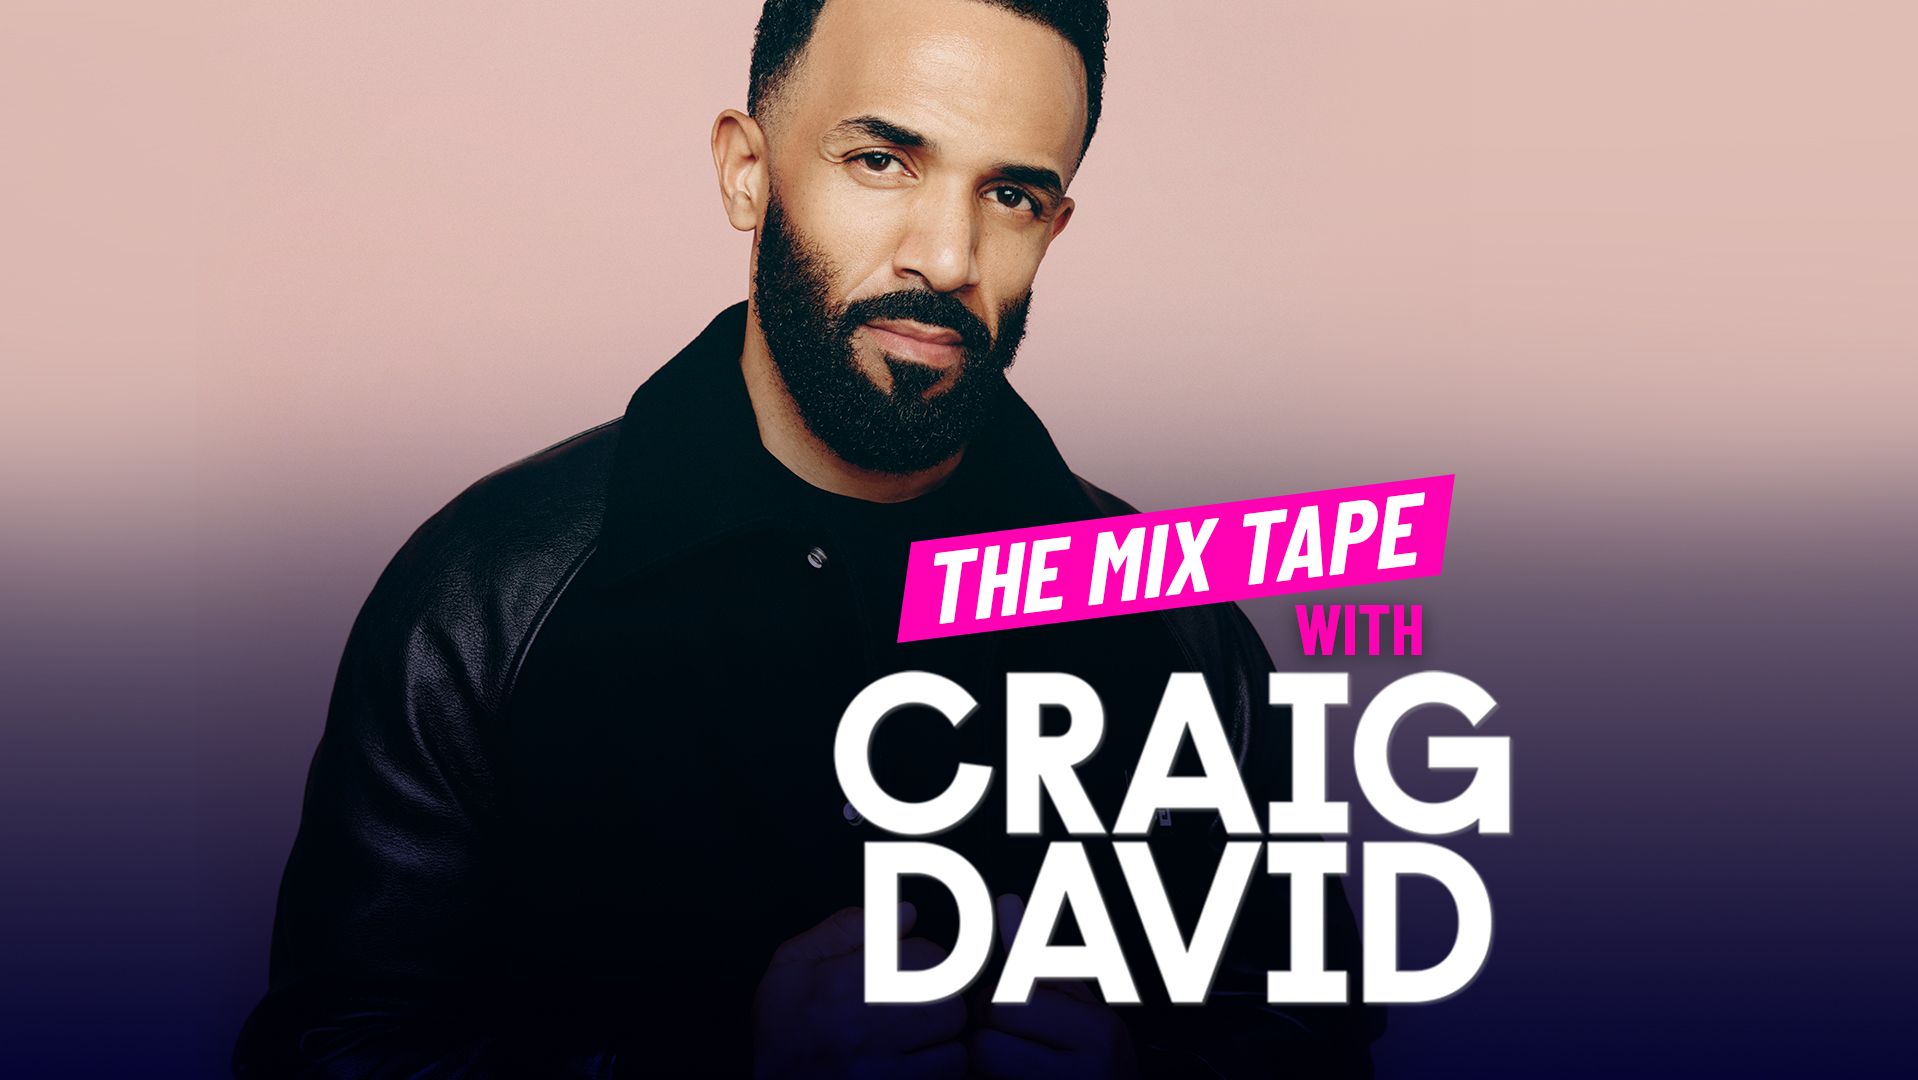 Listen to Craig David's The Mix Tape exclusive